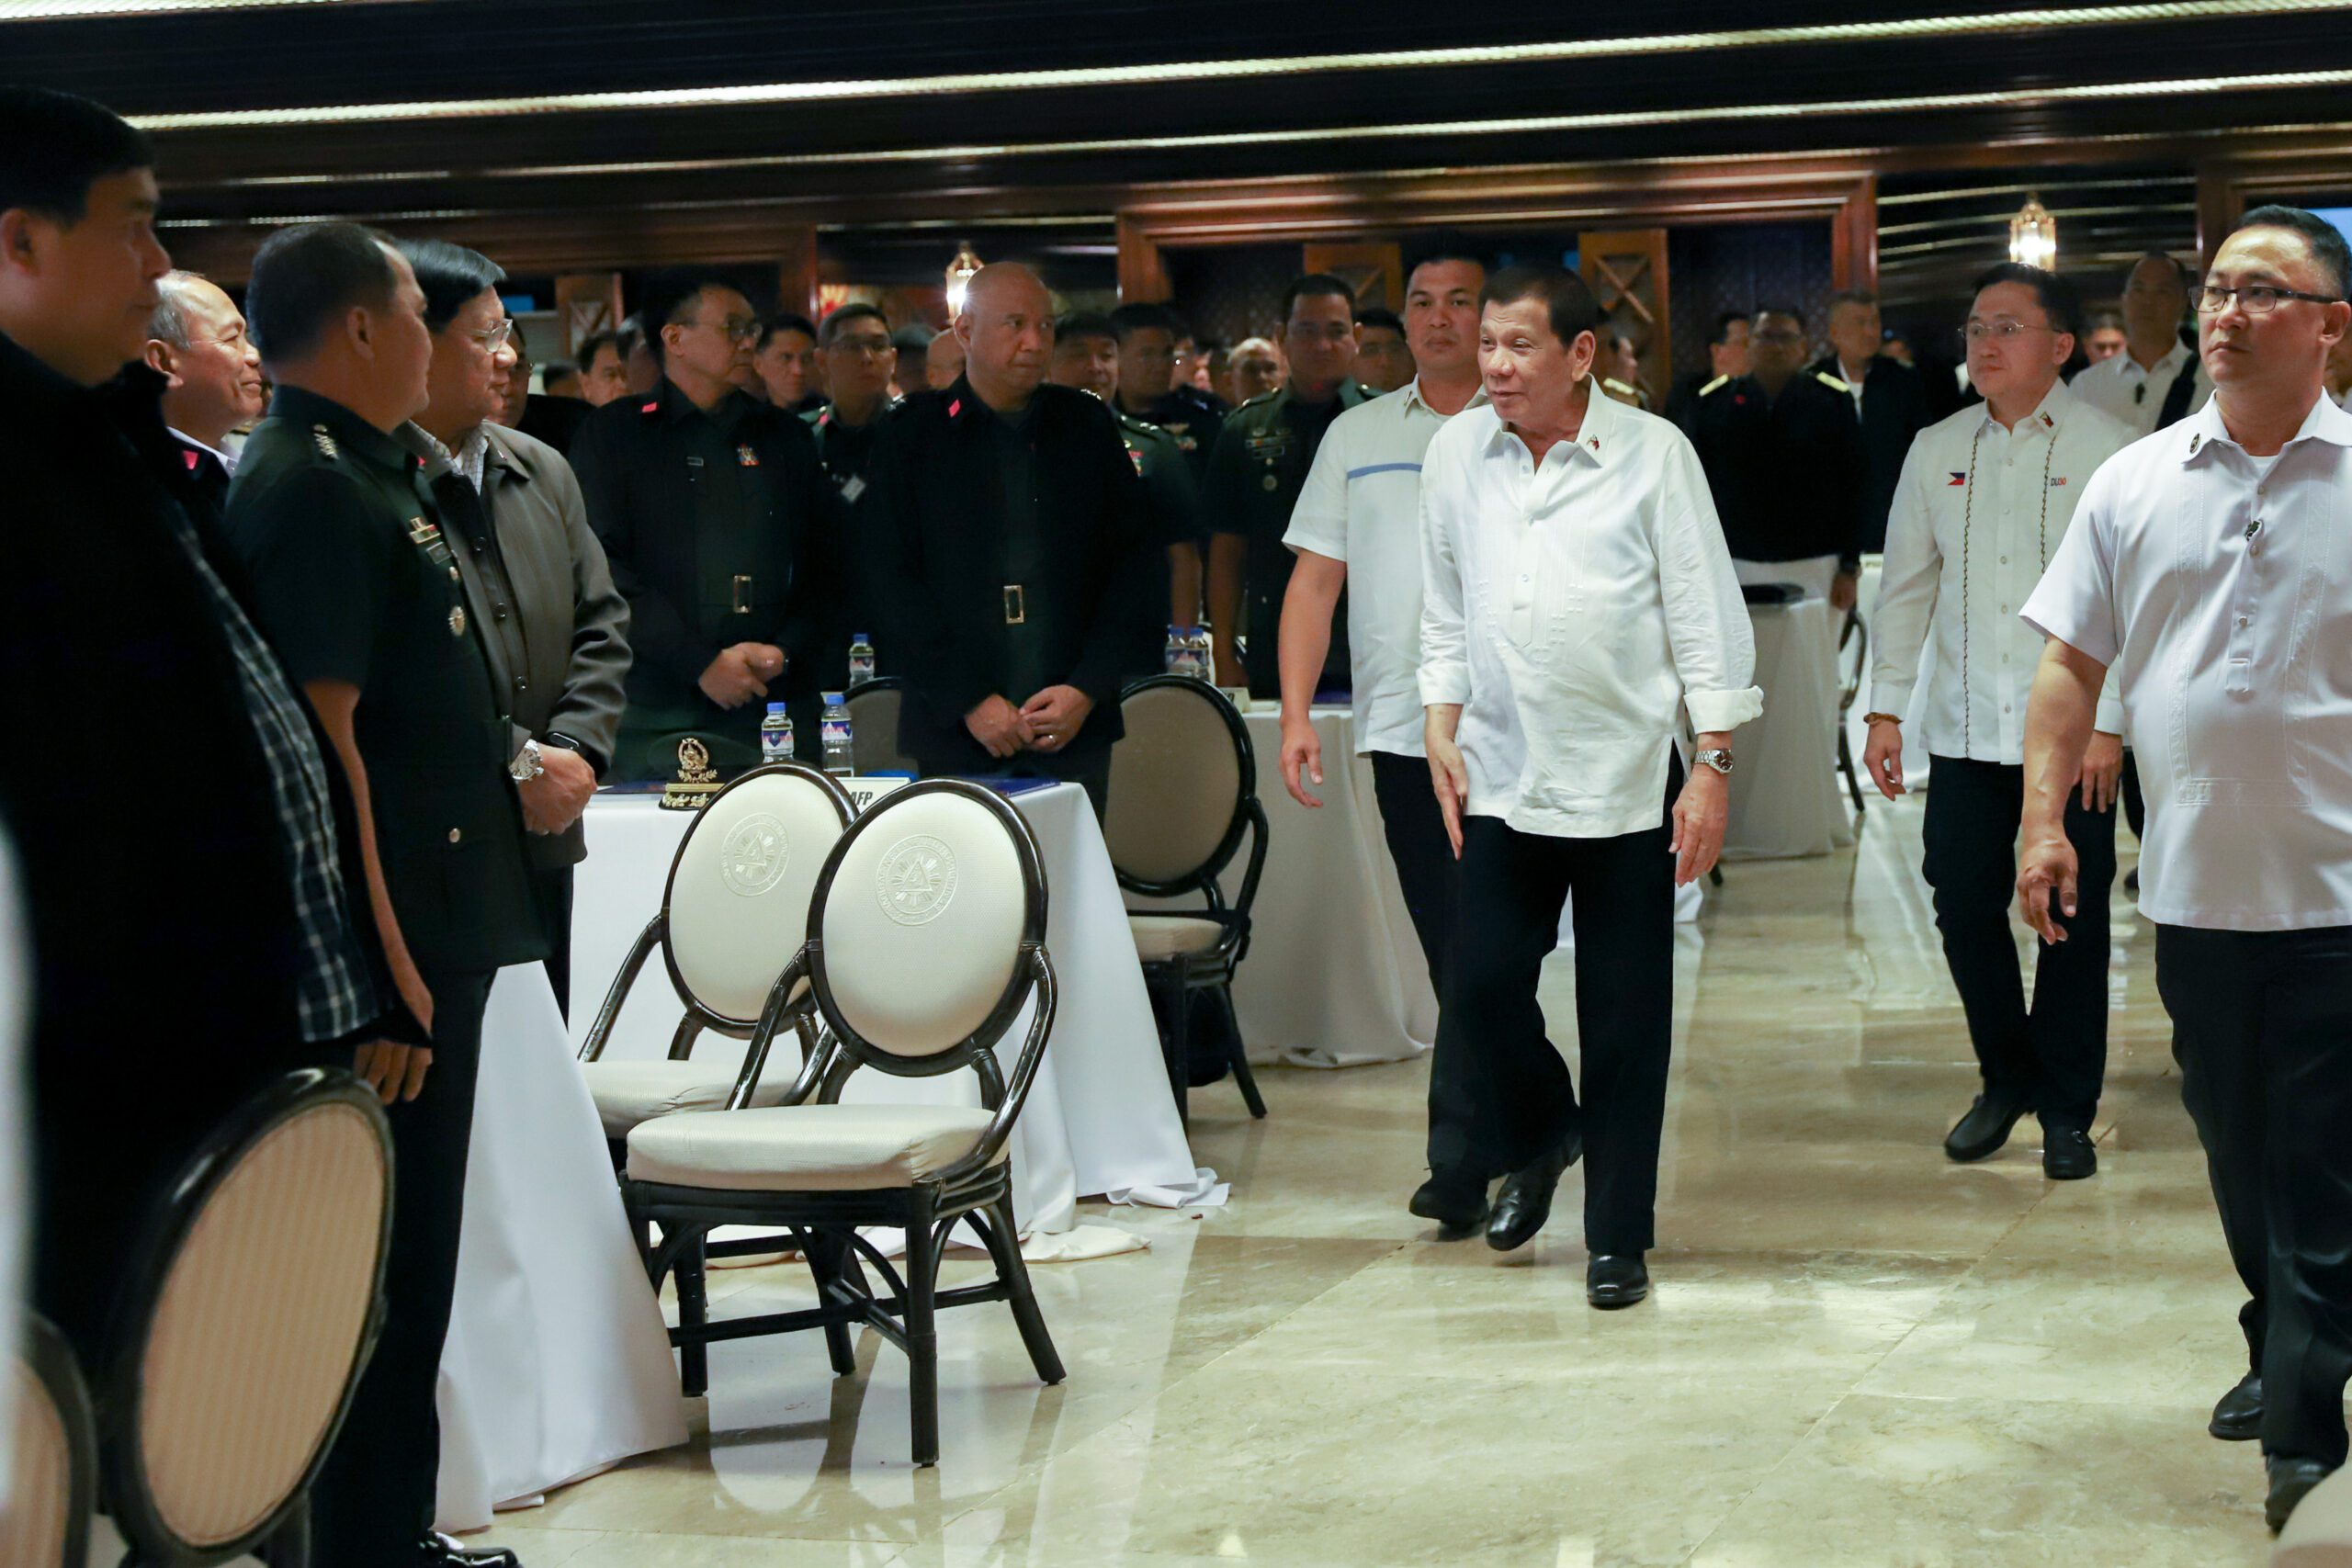 With VFA uncertain, Duterte lashes out at U.S. once again